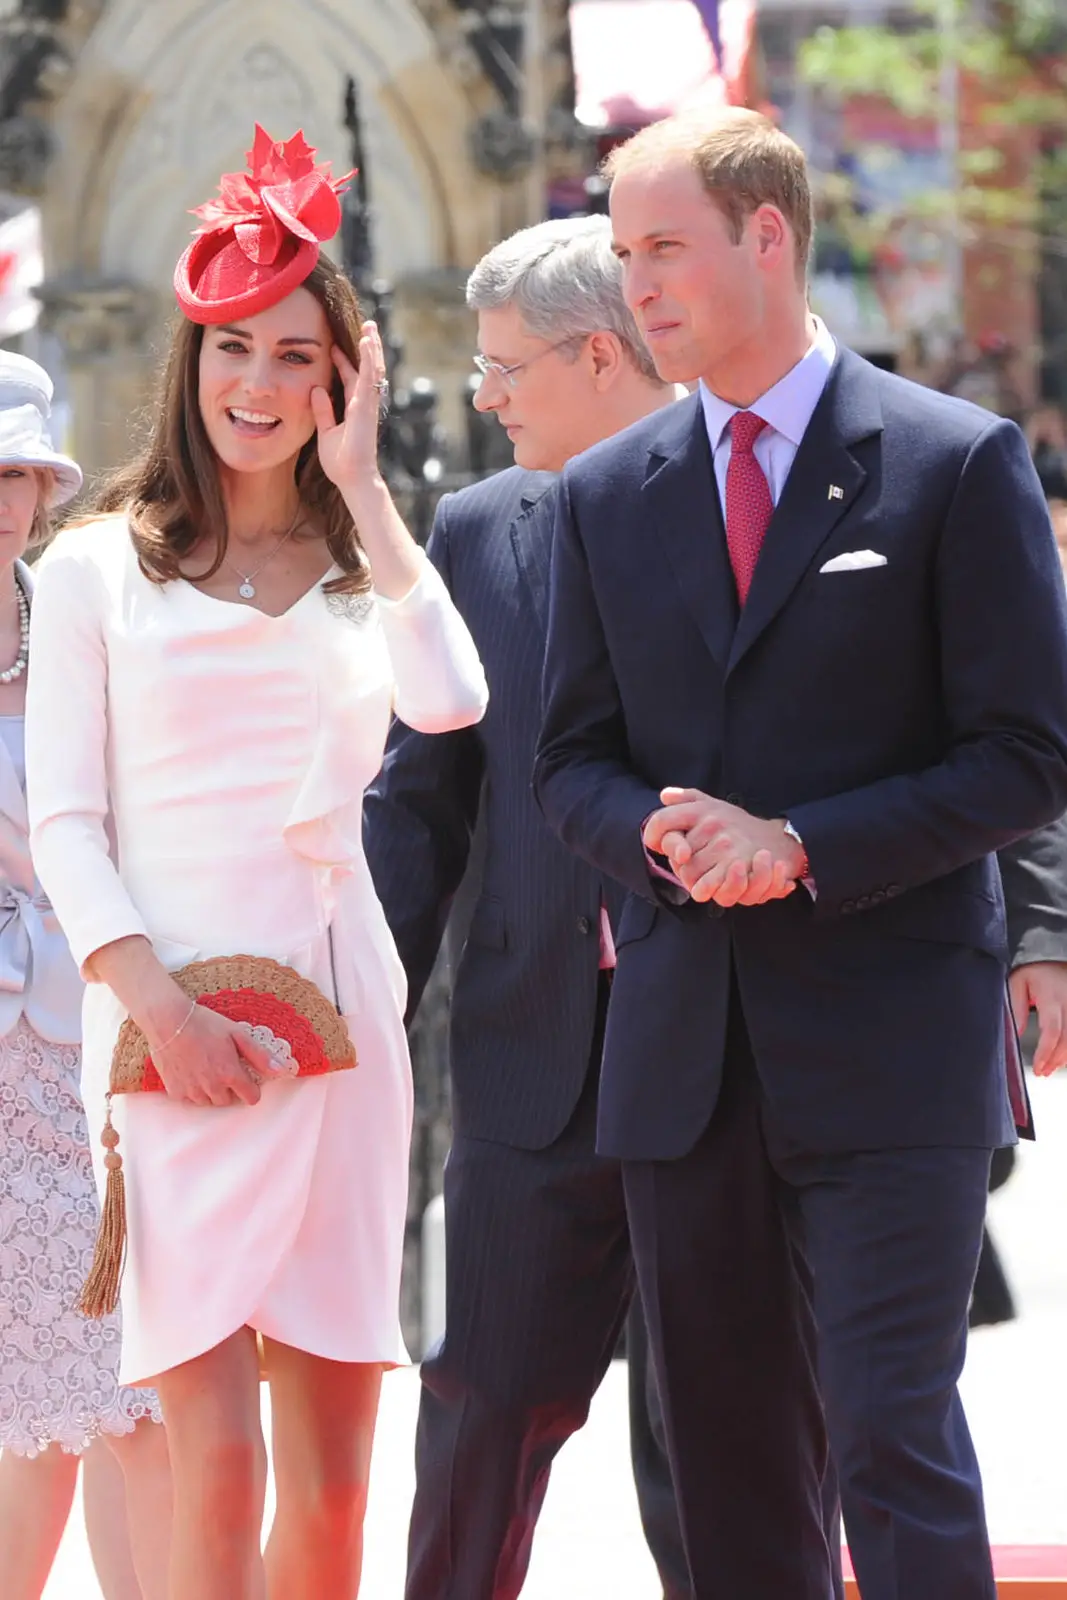 The Duke of Cambridge took his new wife the Duchess of cambridge for rowing during Canada visit in 2011